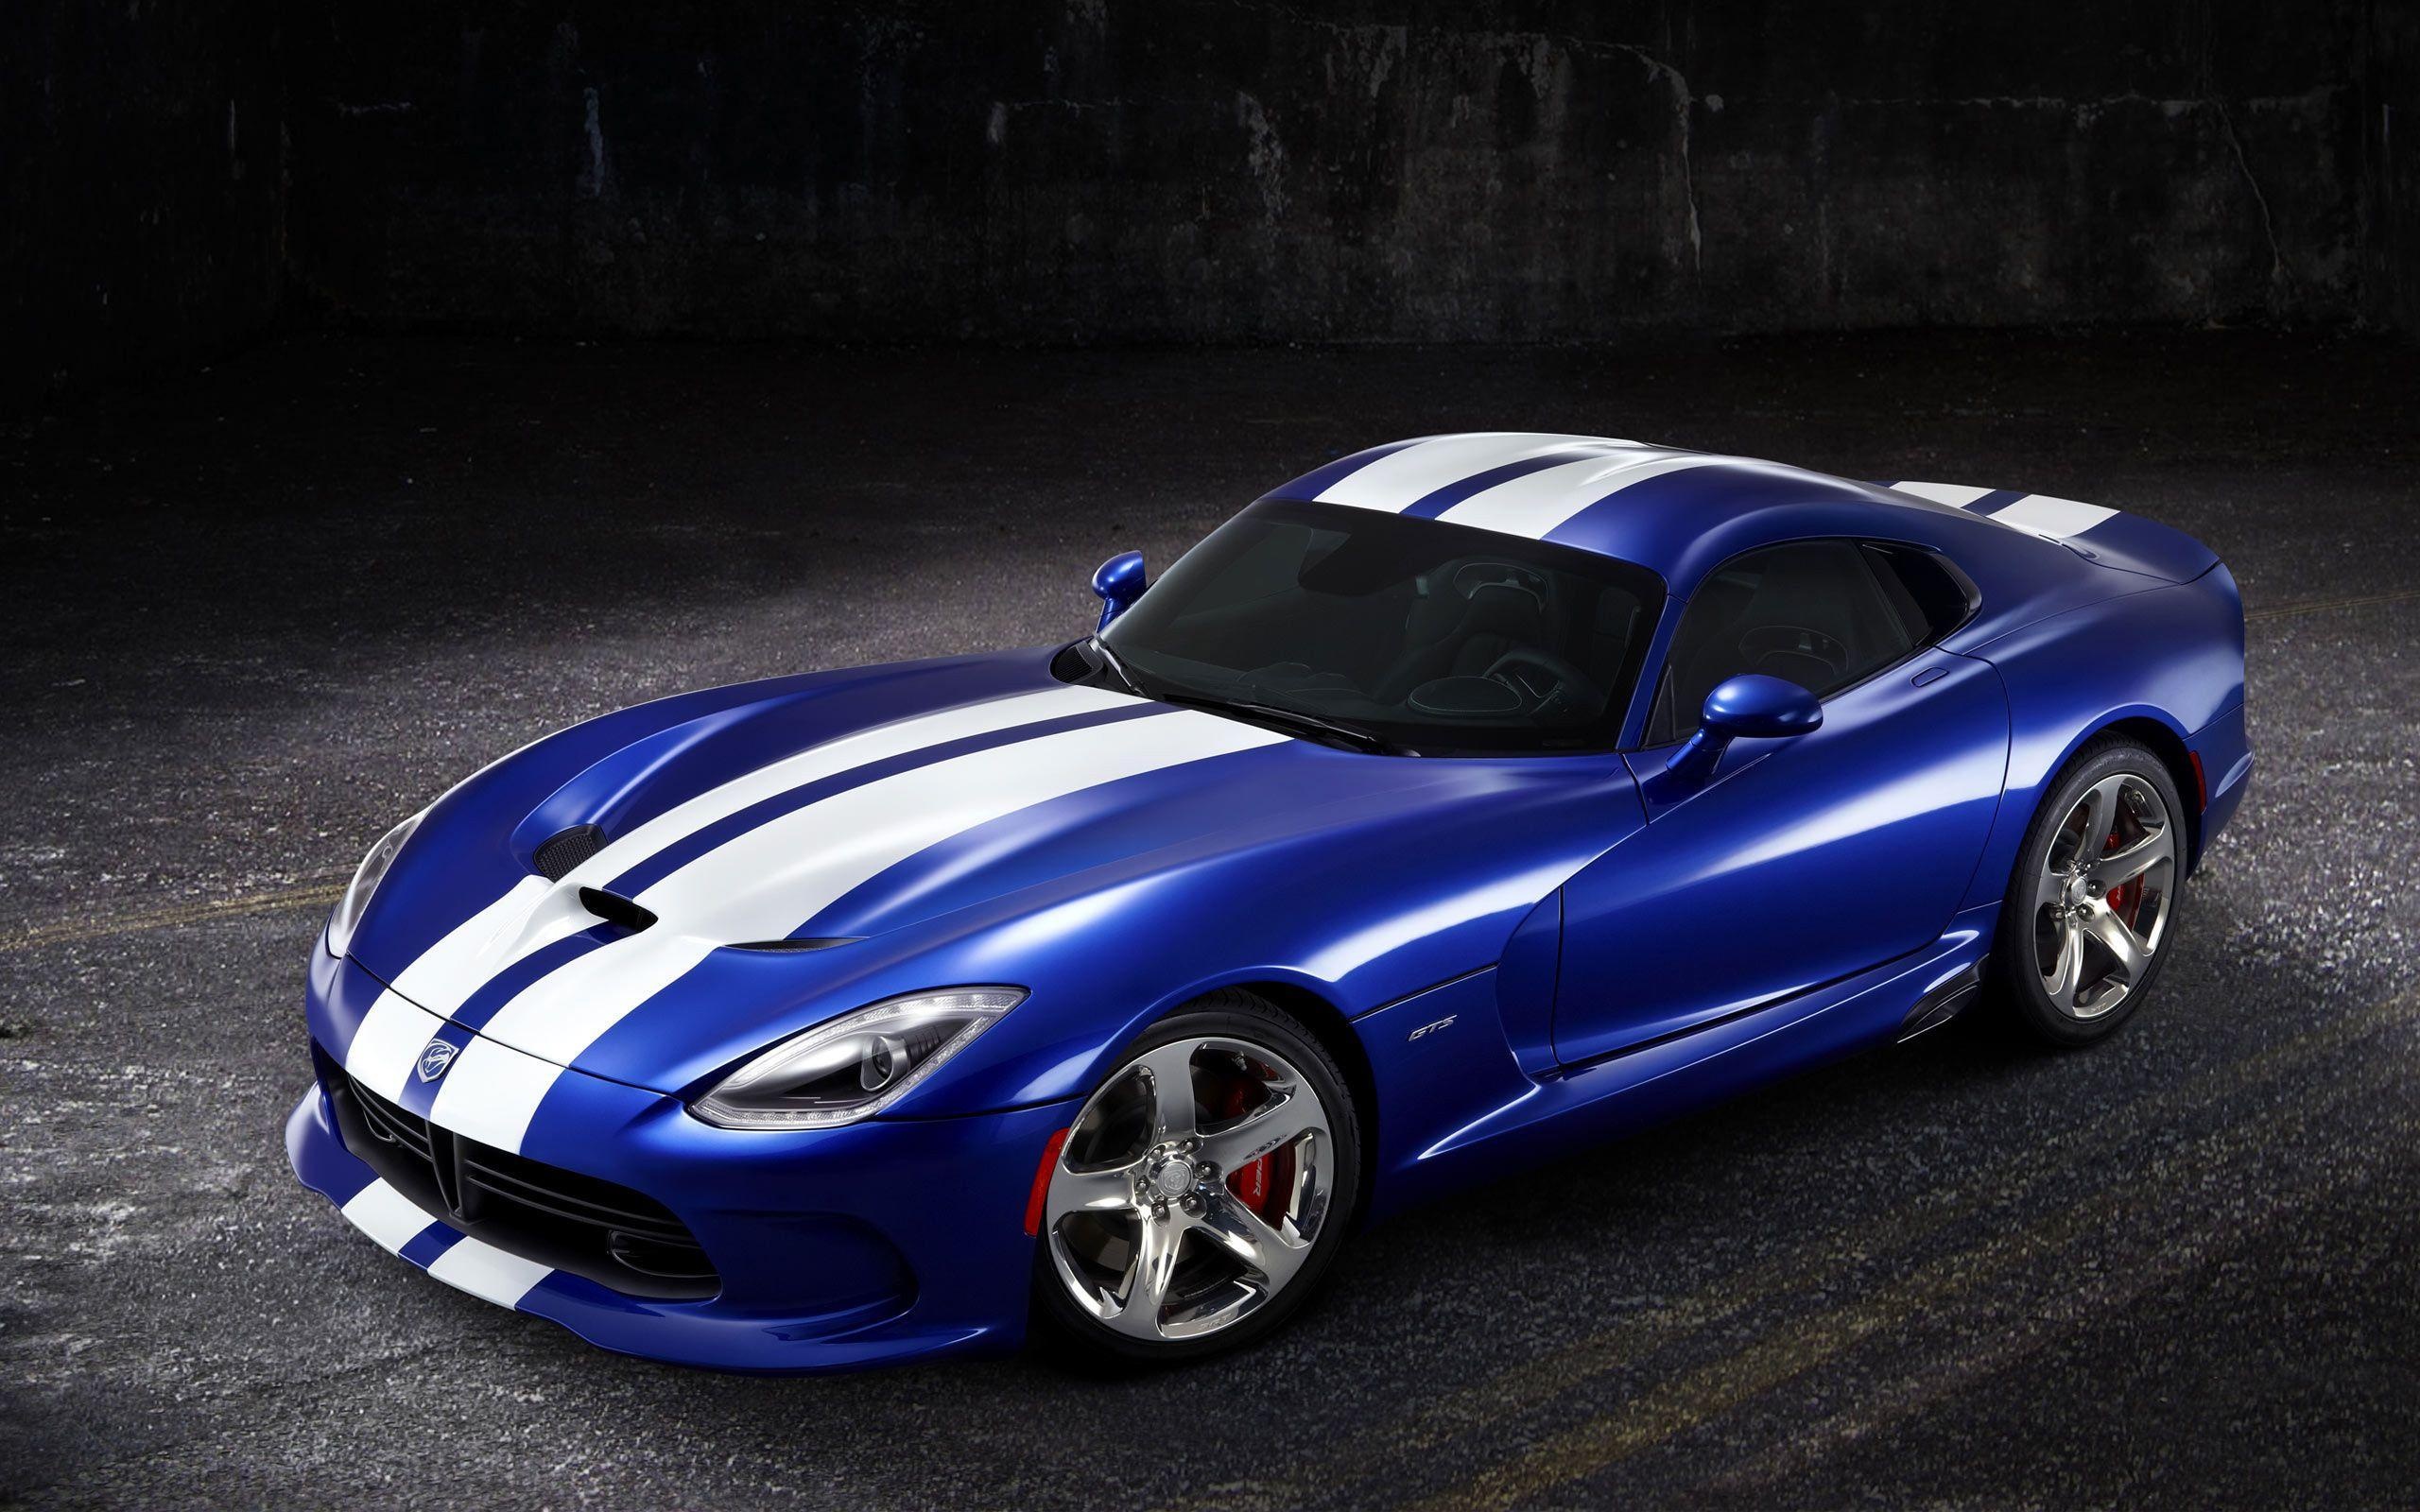 Dodge Viper, Automotive excellence, Jaw-dropping power, Dynamic performance, 2560x1600 HD Desktop